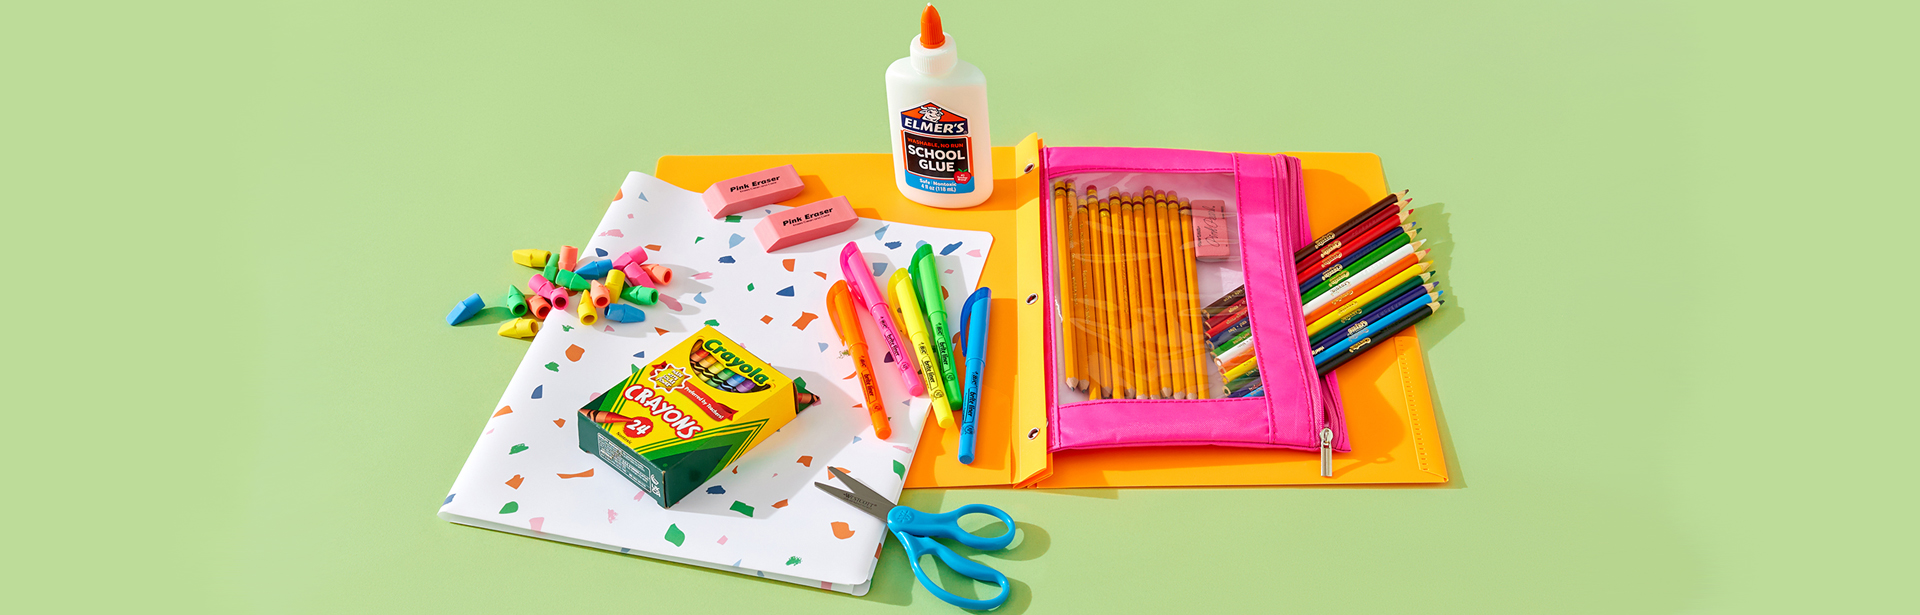 Dollar General Prepares Students and Teachers for Back-to-School Season with Deals and Savings